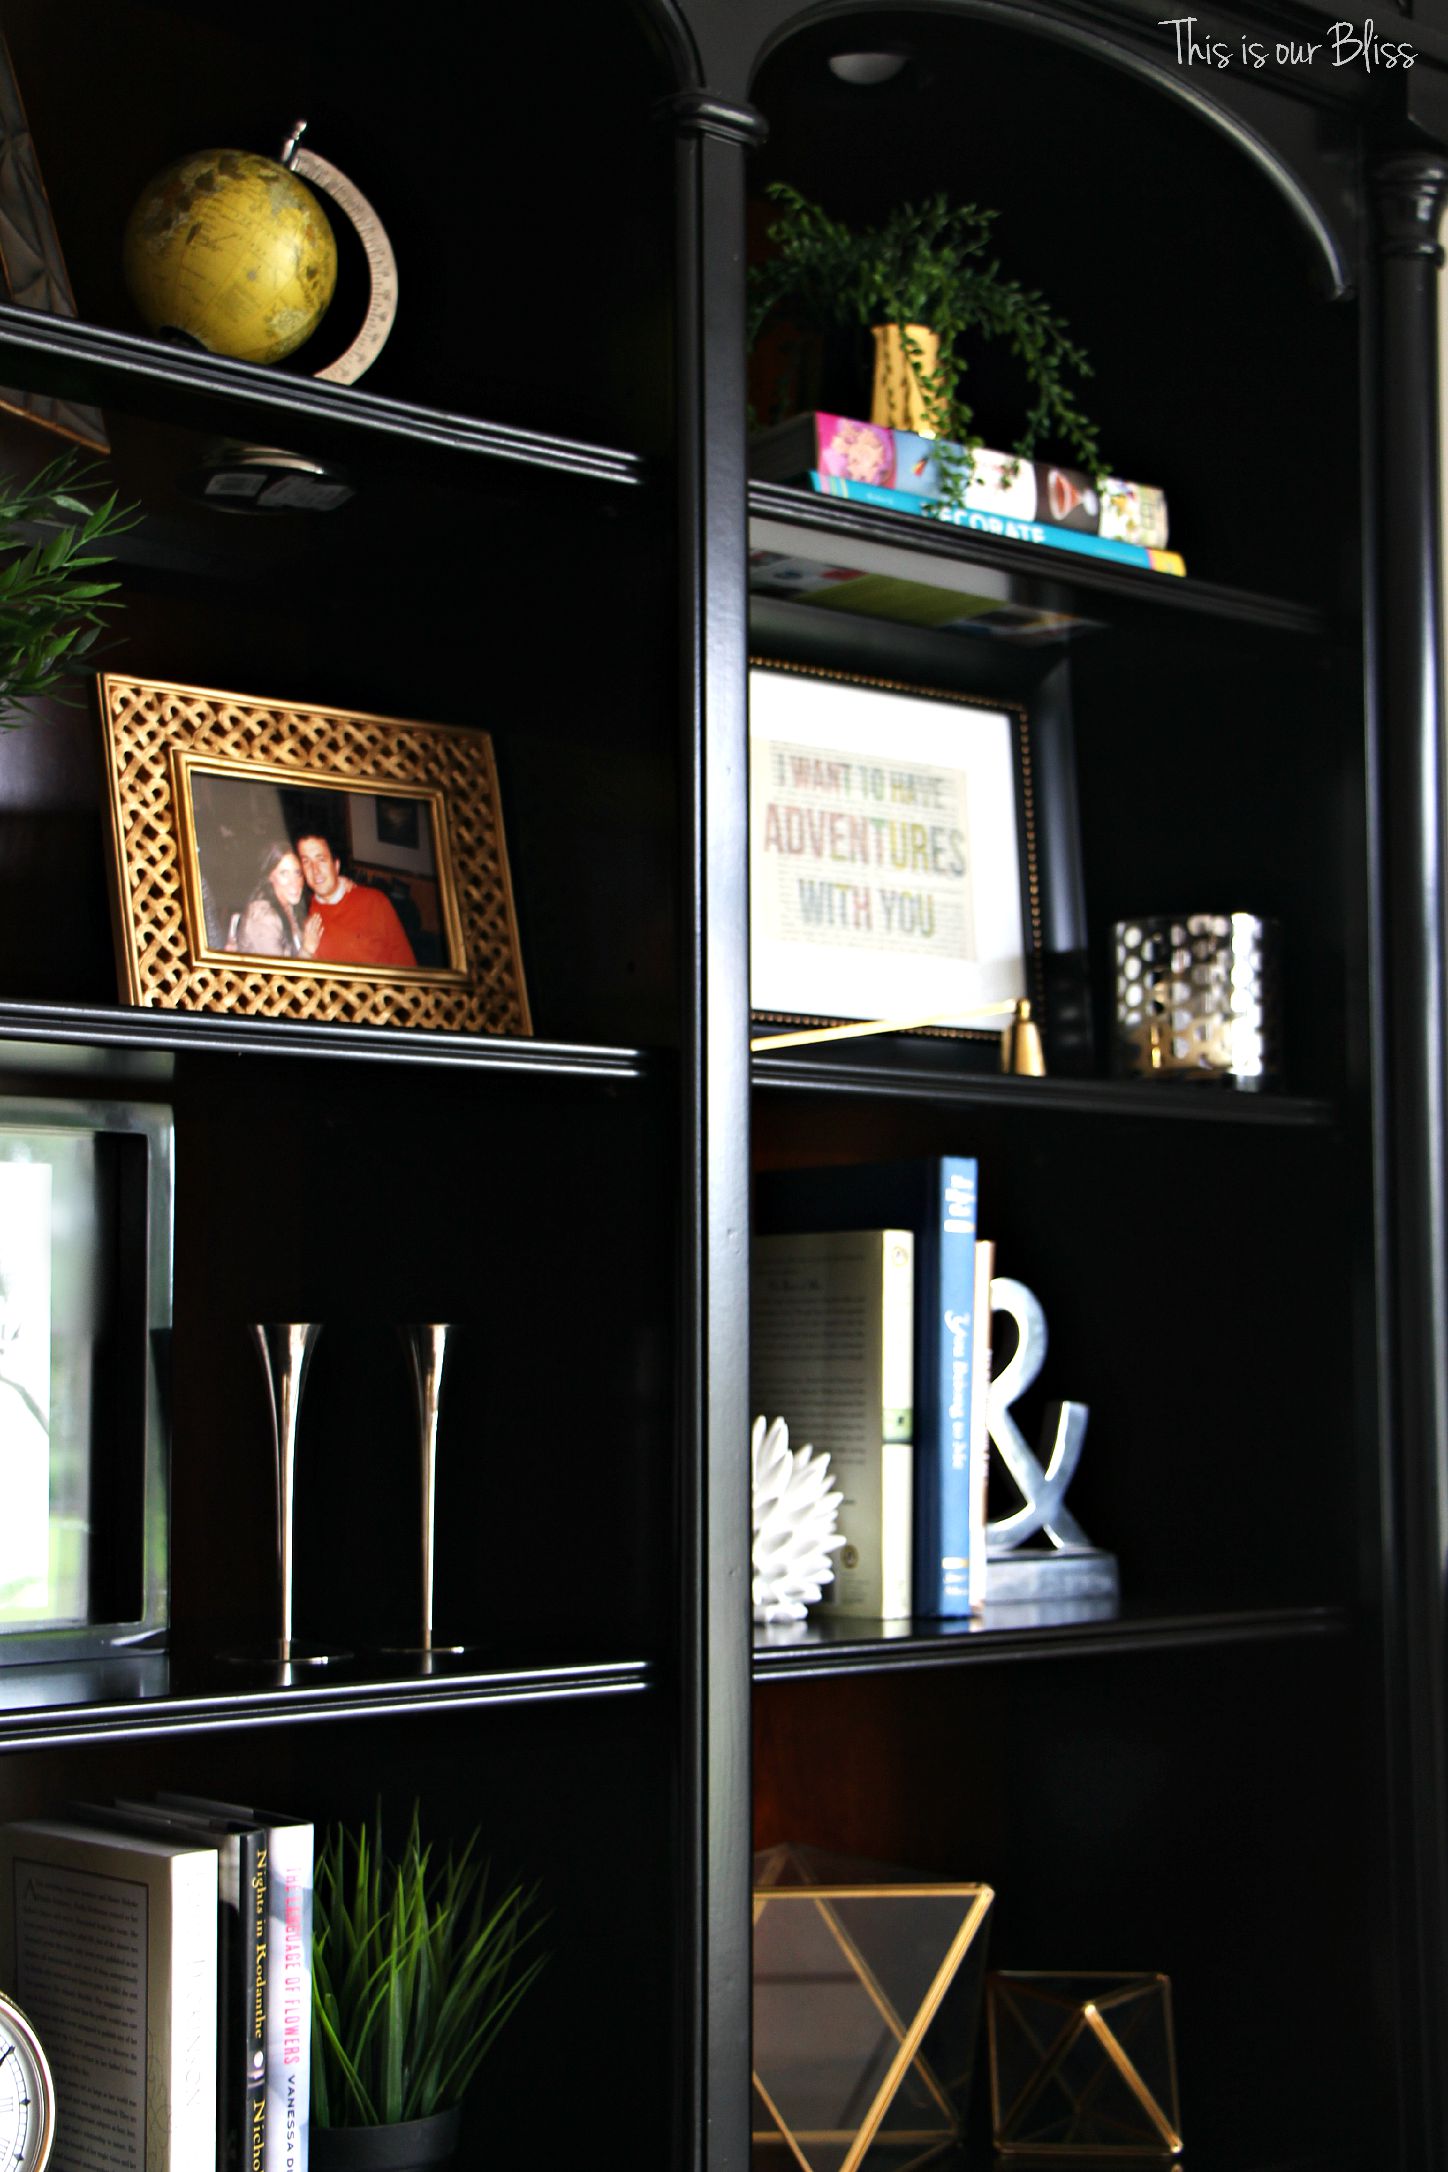 formal living room bookcase before 1 - how to update an old bookcase - This is our bliss